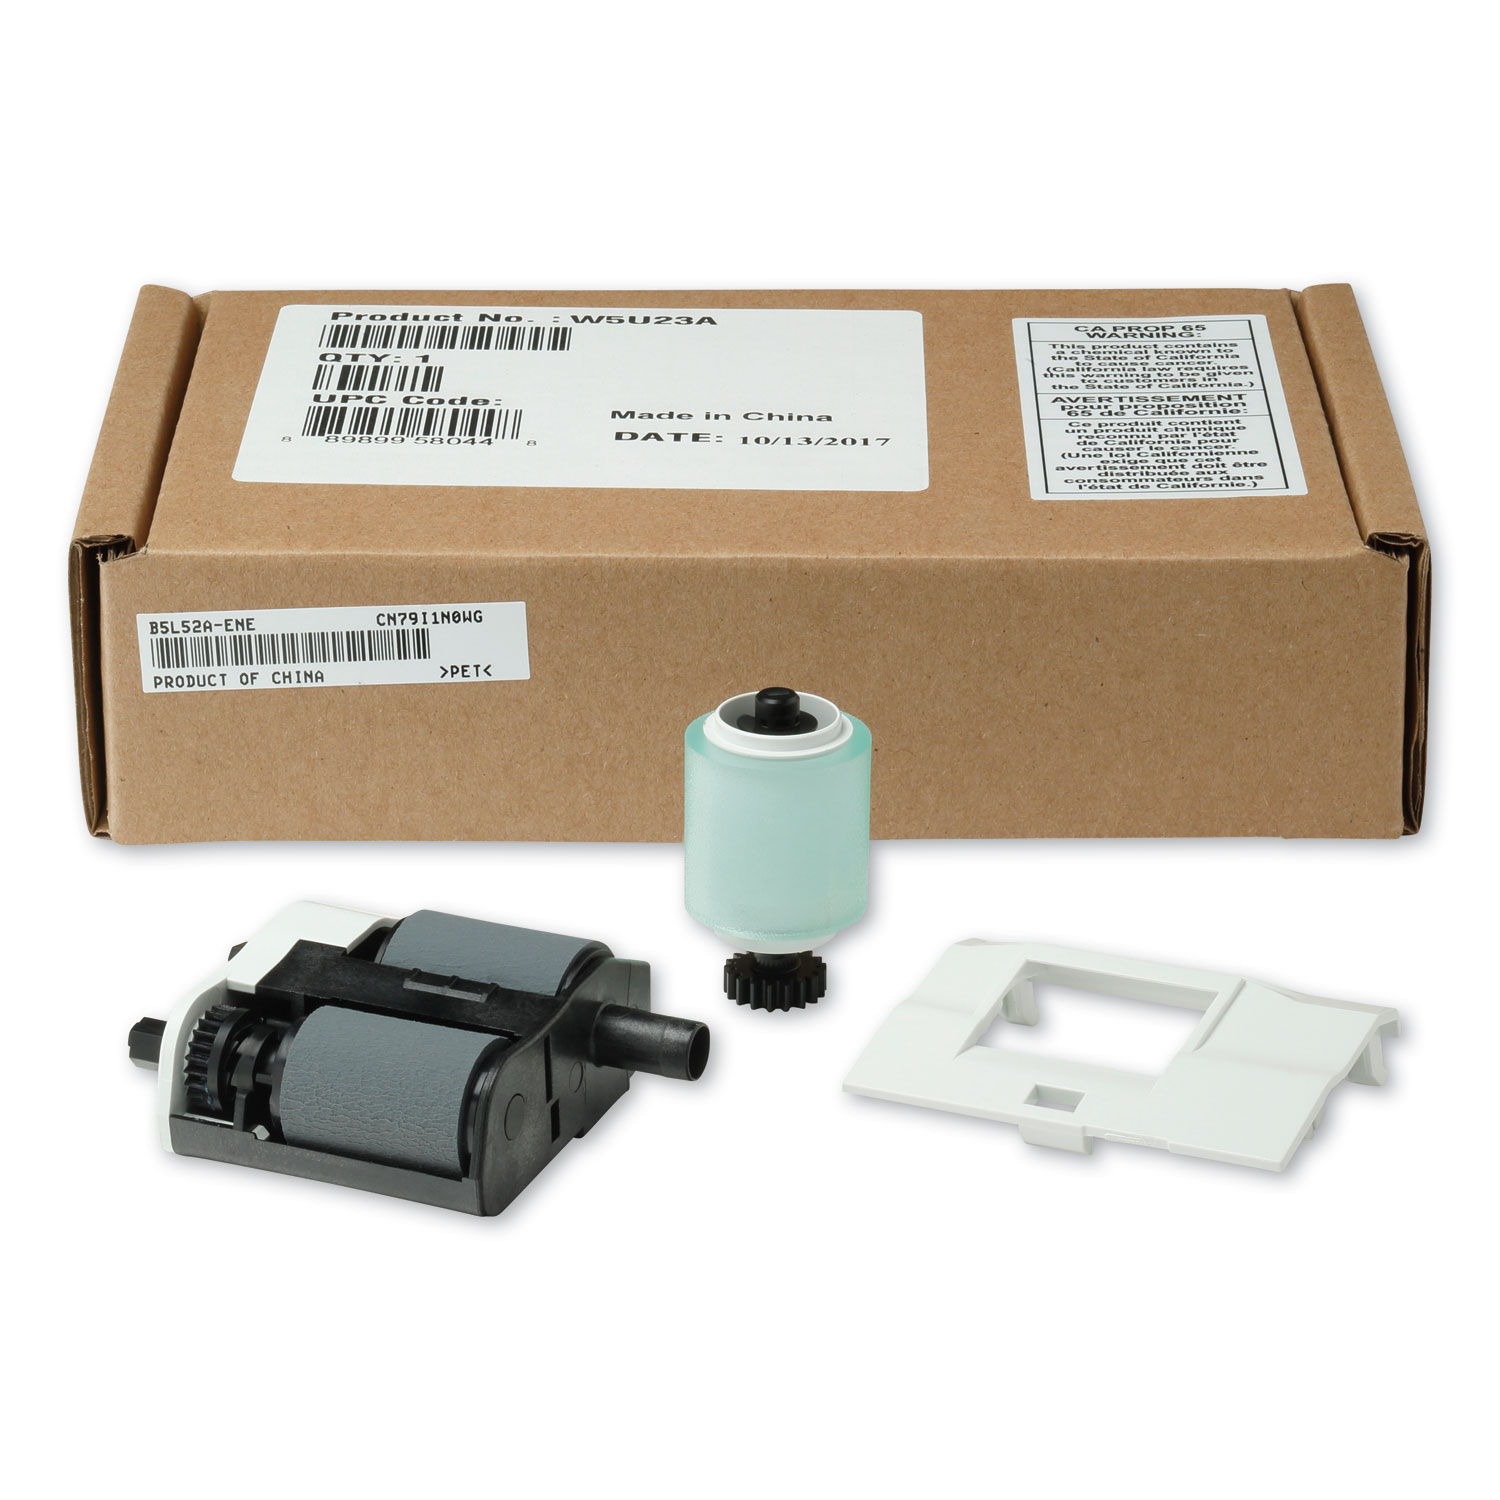 W5U23A 200 ADF Roller Replacement Kit